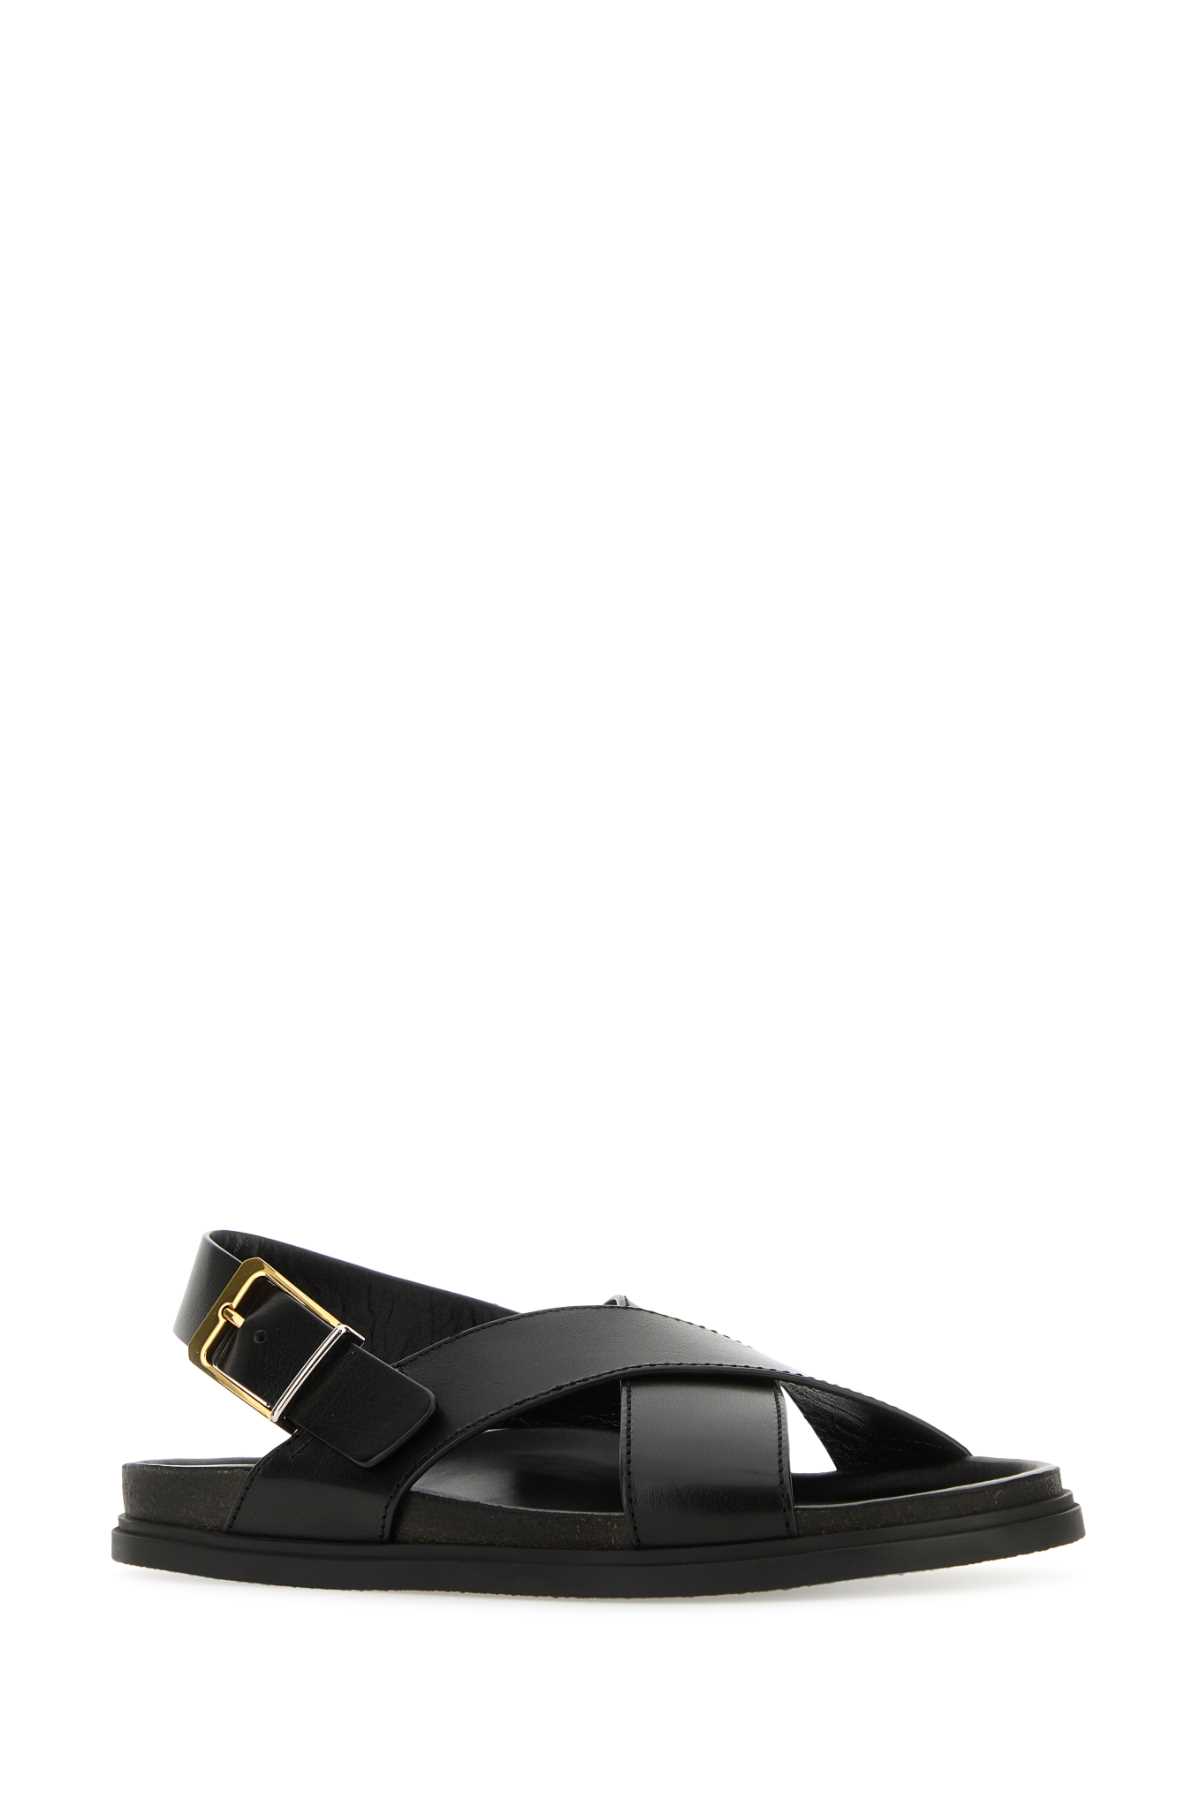 THE ROW BLACK LEATHER SANDALS